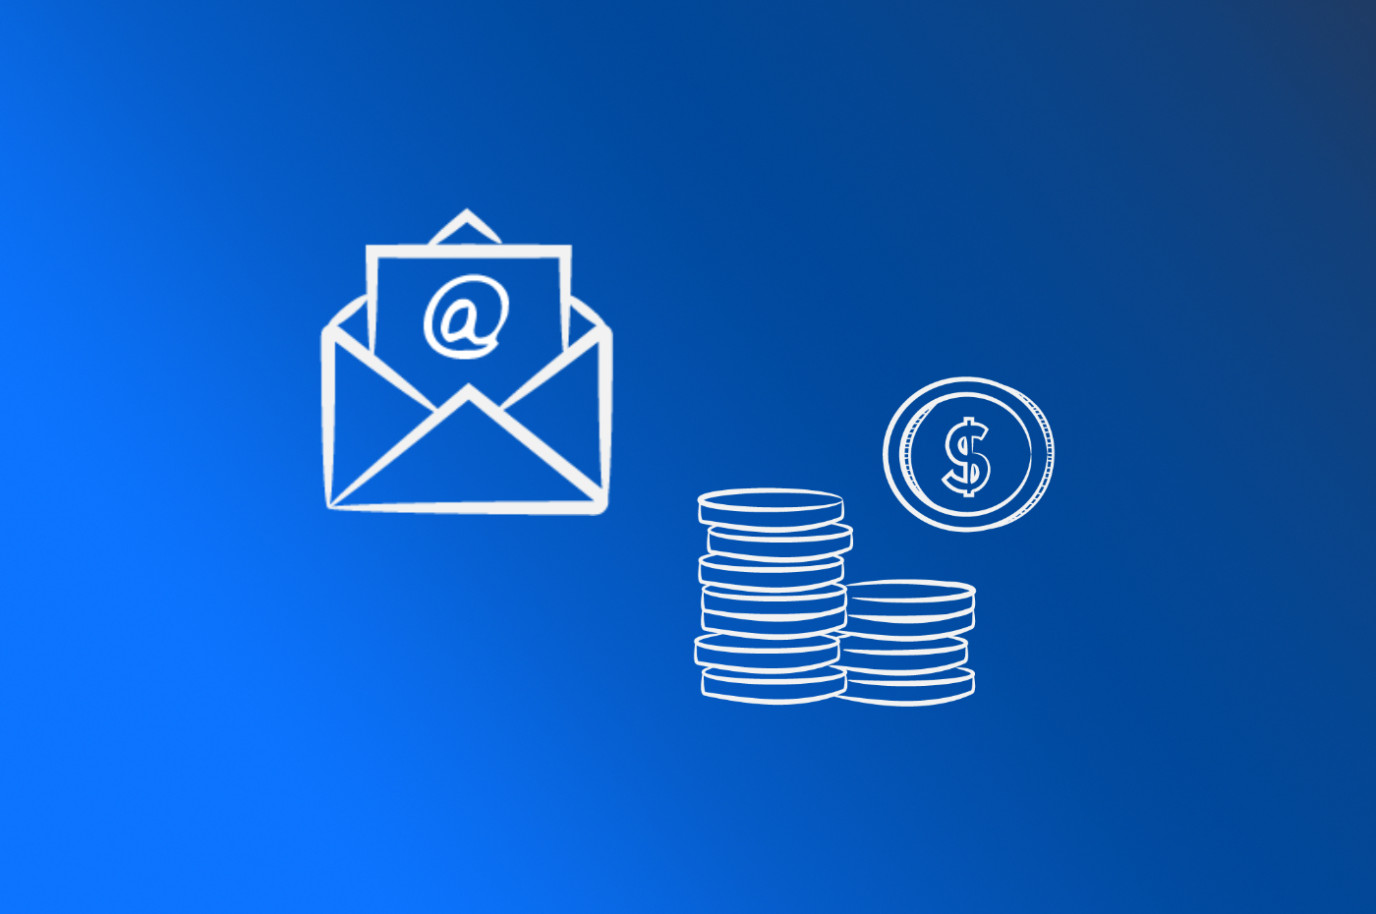 Email marketing is cost effective